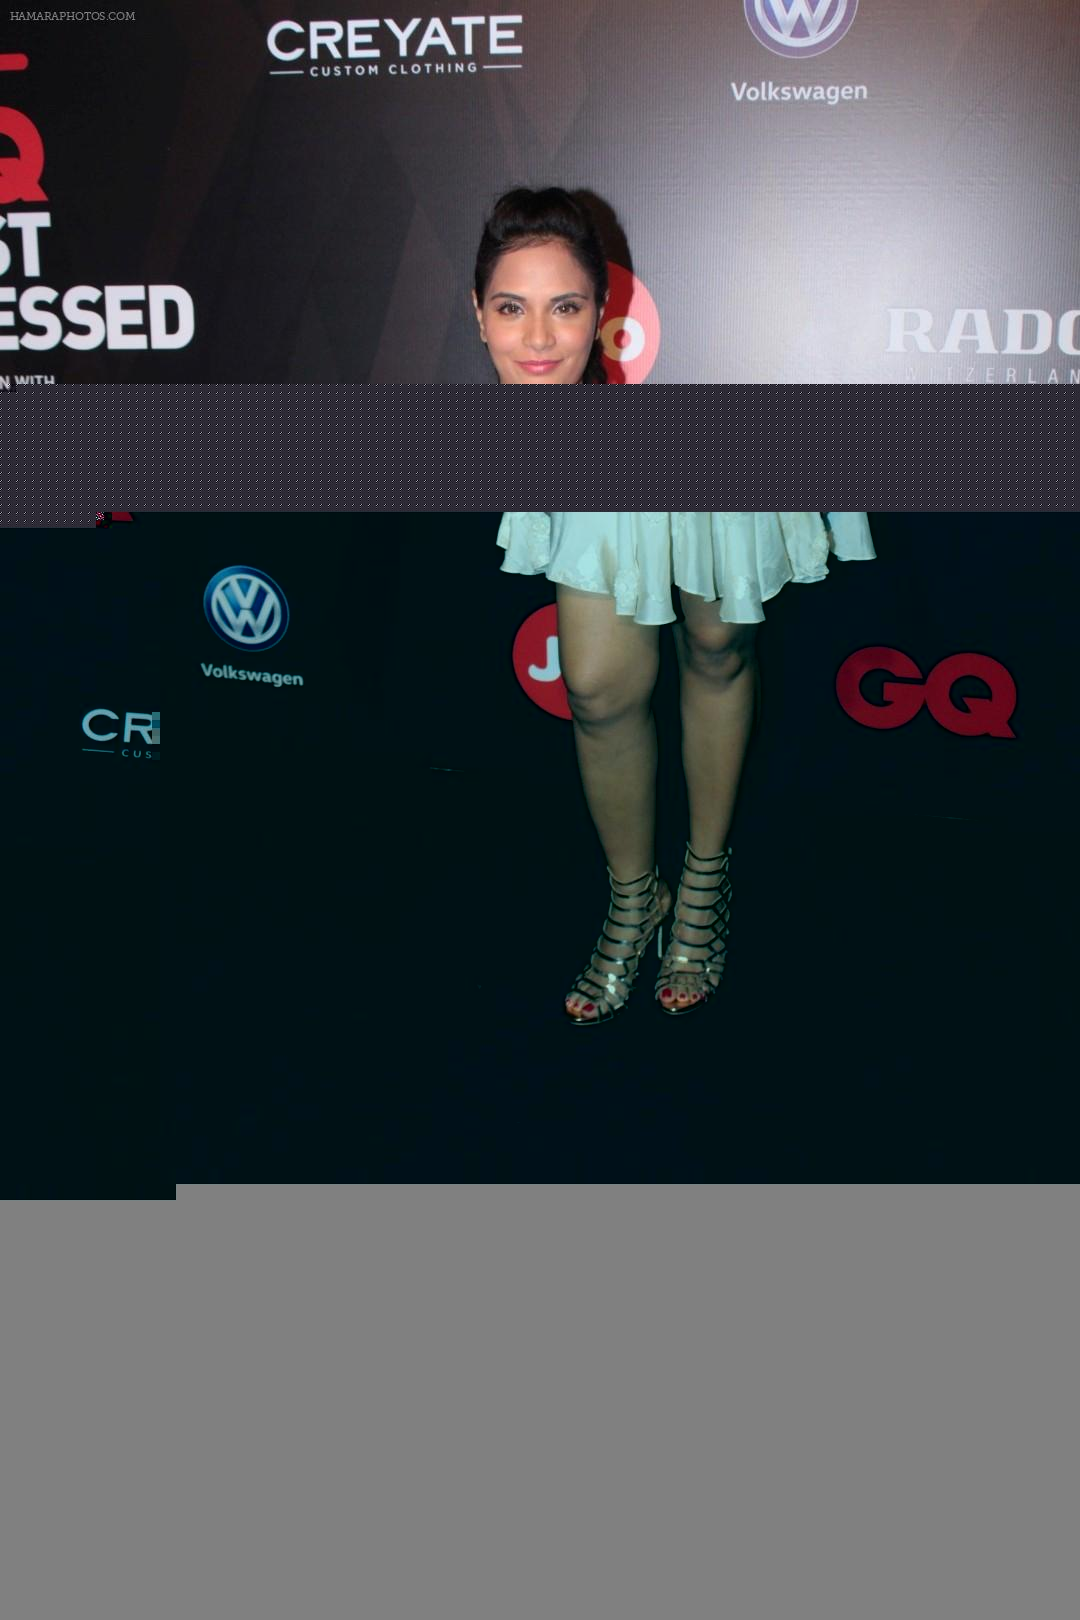 Richa Chadda at Star Studded Red Carpet For GQ Best Dressed 2017 on 4th June 2017